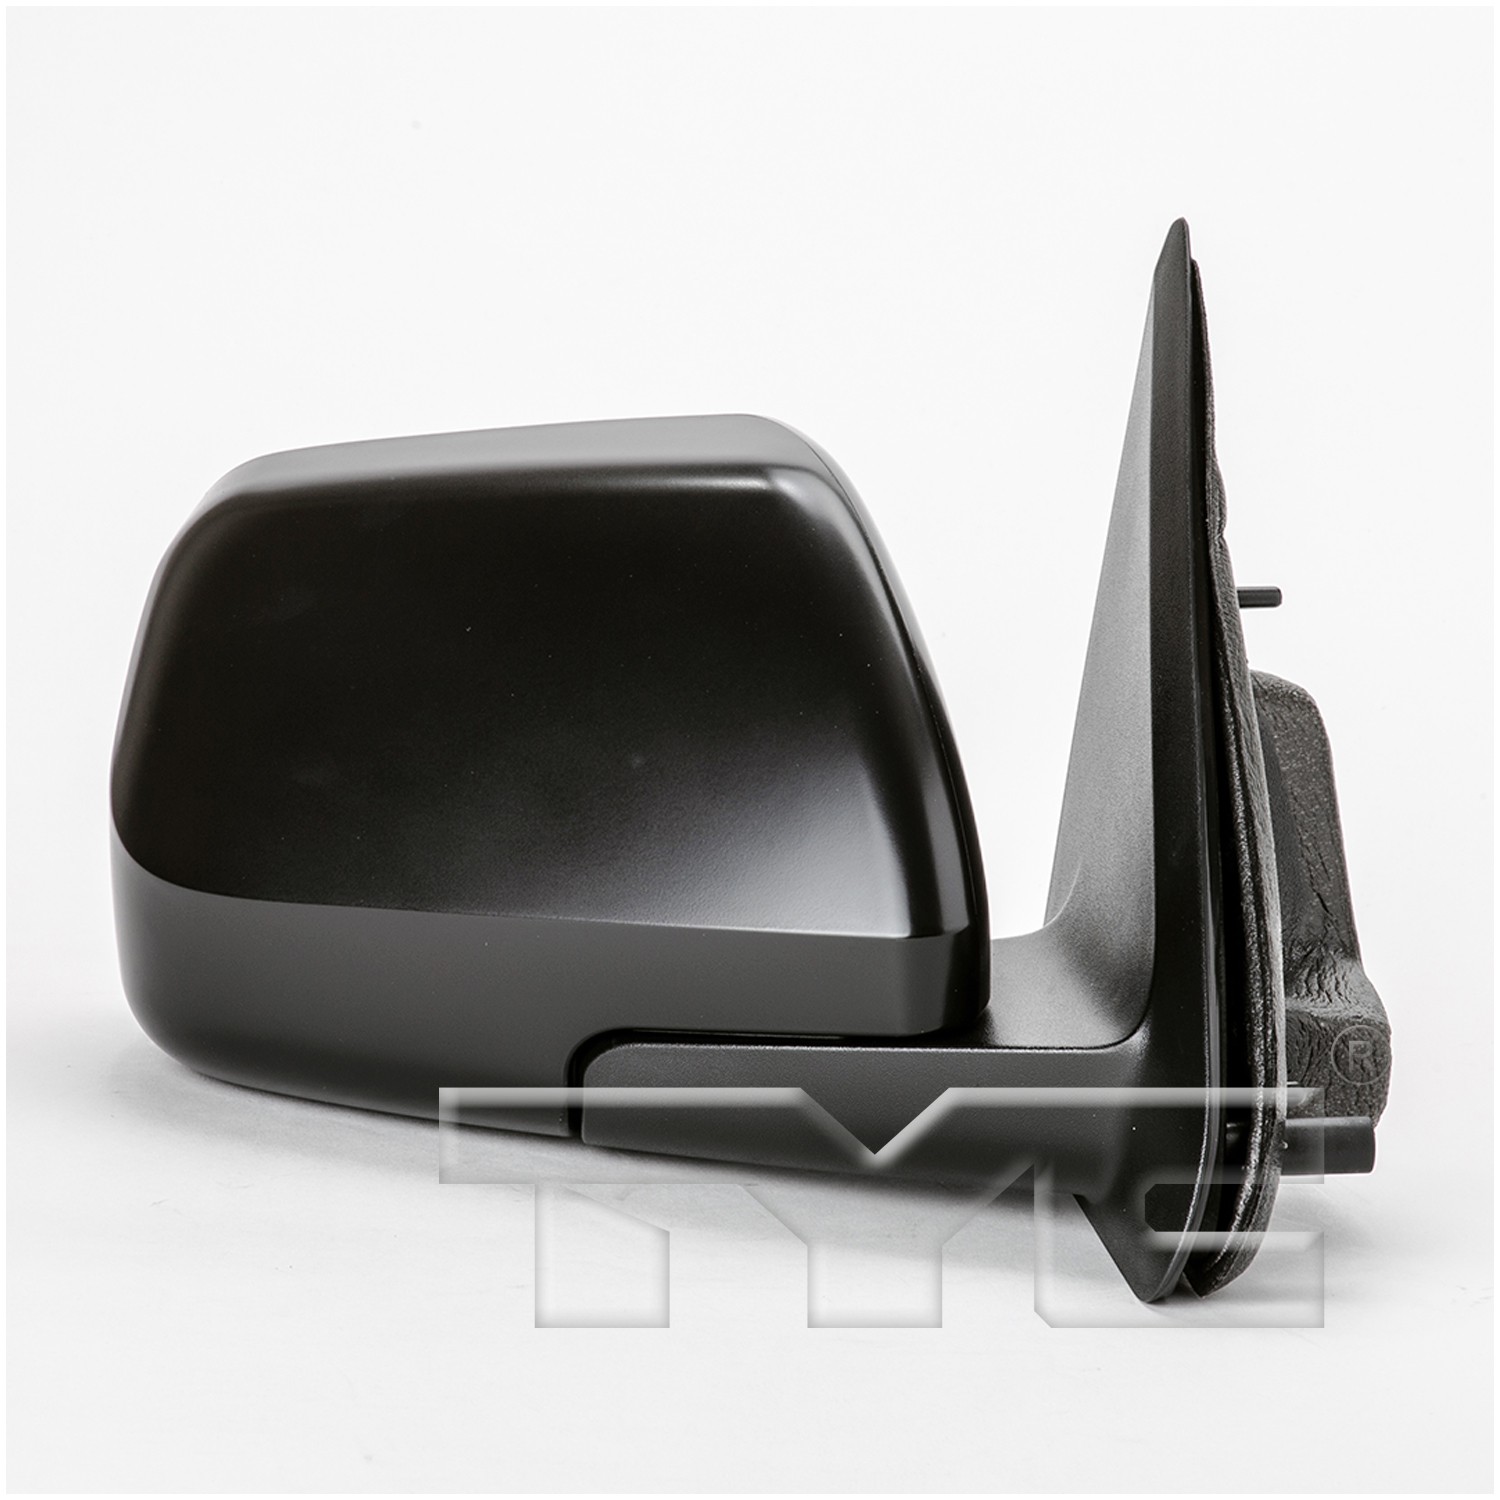 Aftermarket MIRRORS for FORD - ESCAPE, ESCAPE,08-09,RT Mirror outside rear view